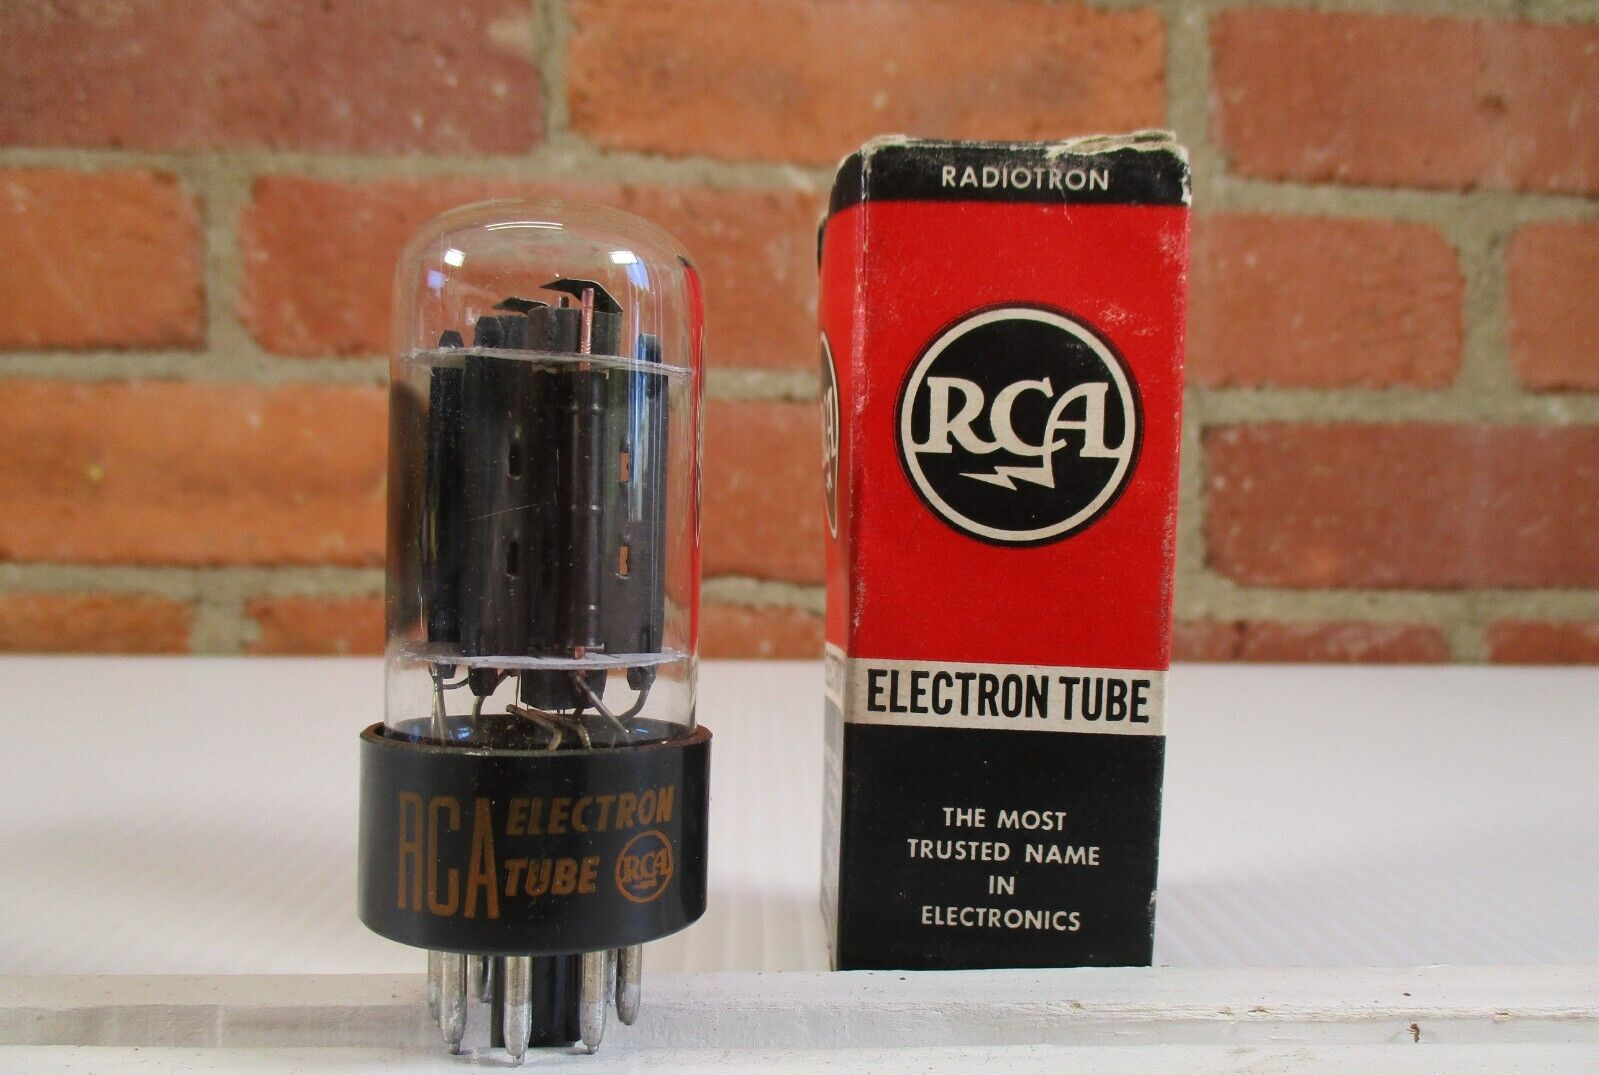 RCA 6BX7GT Vacuum Tube Black Plate Copper Rods TV-7 Tested New Old Stock in Box - $14.00